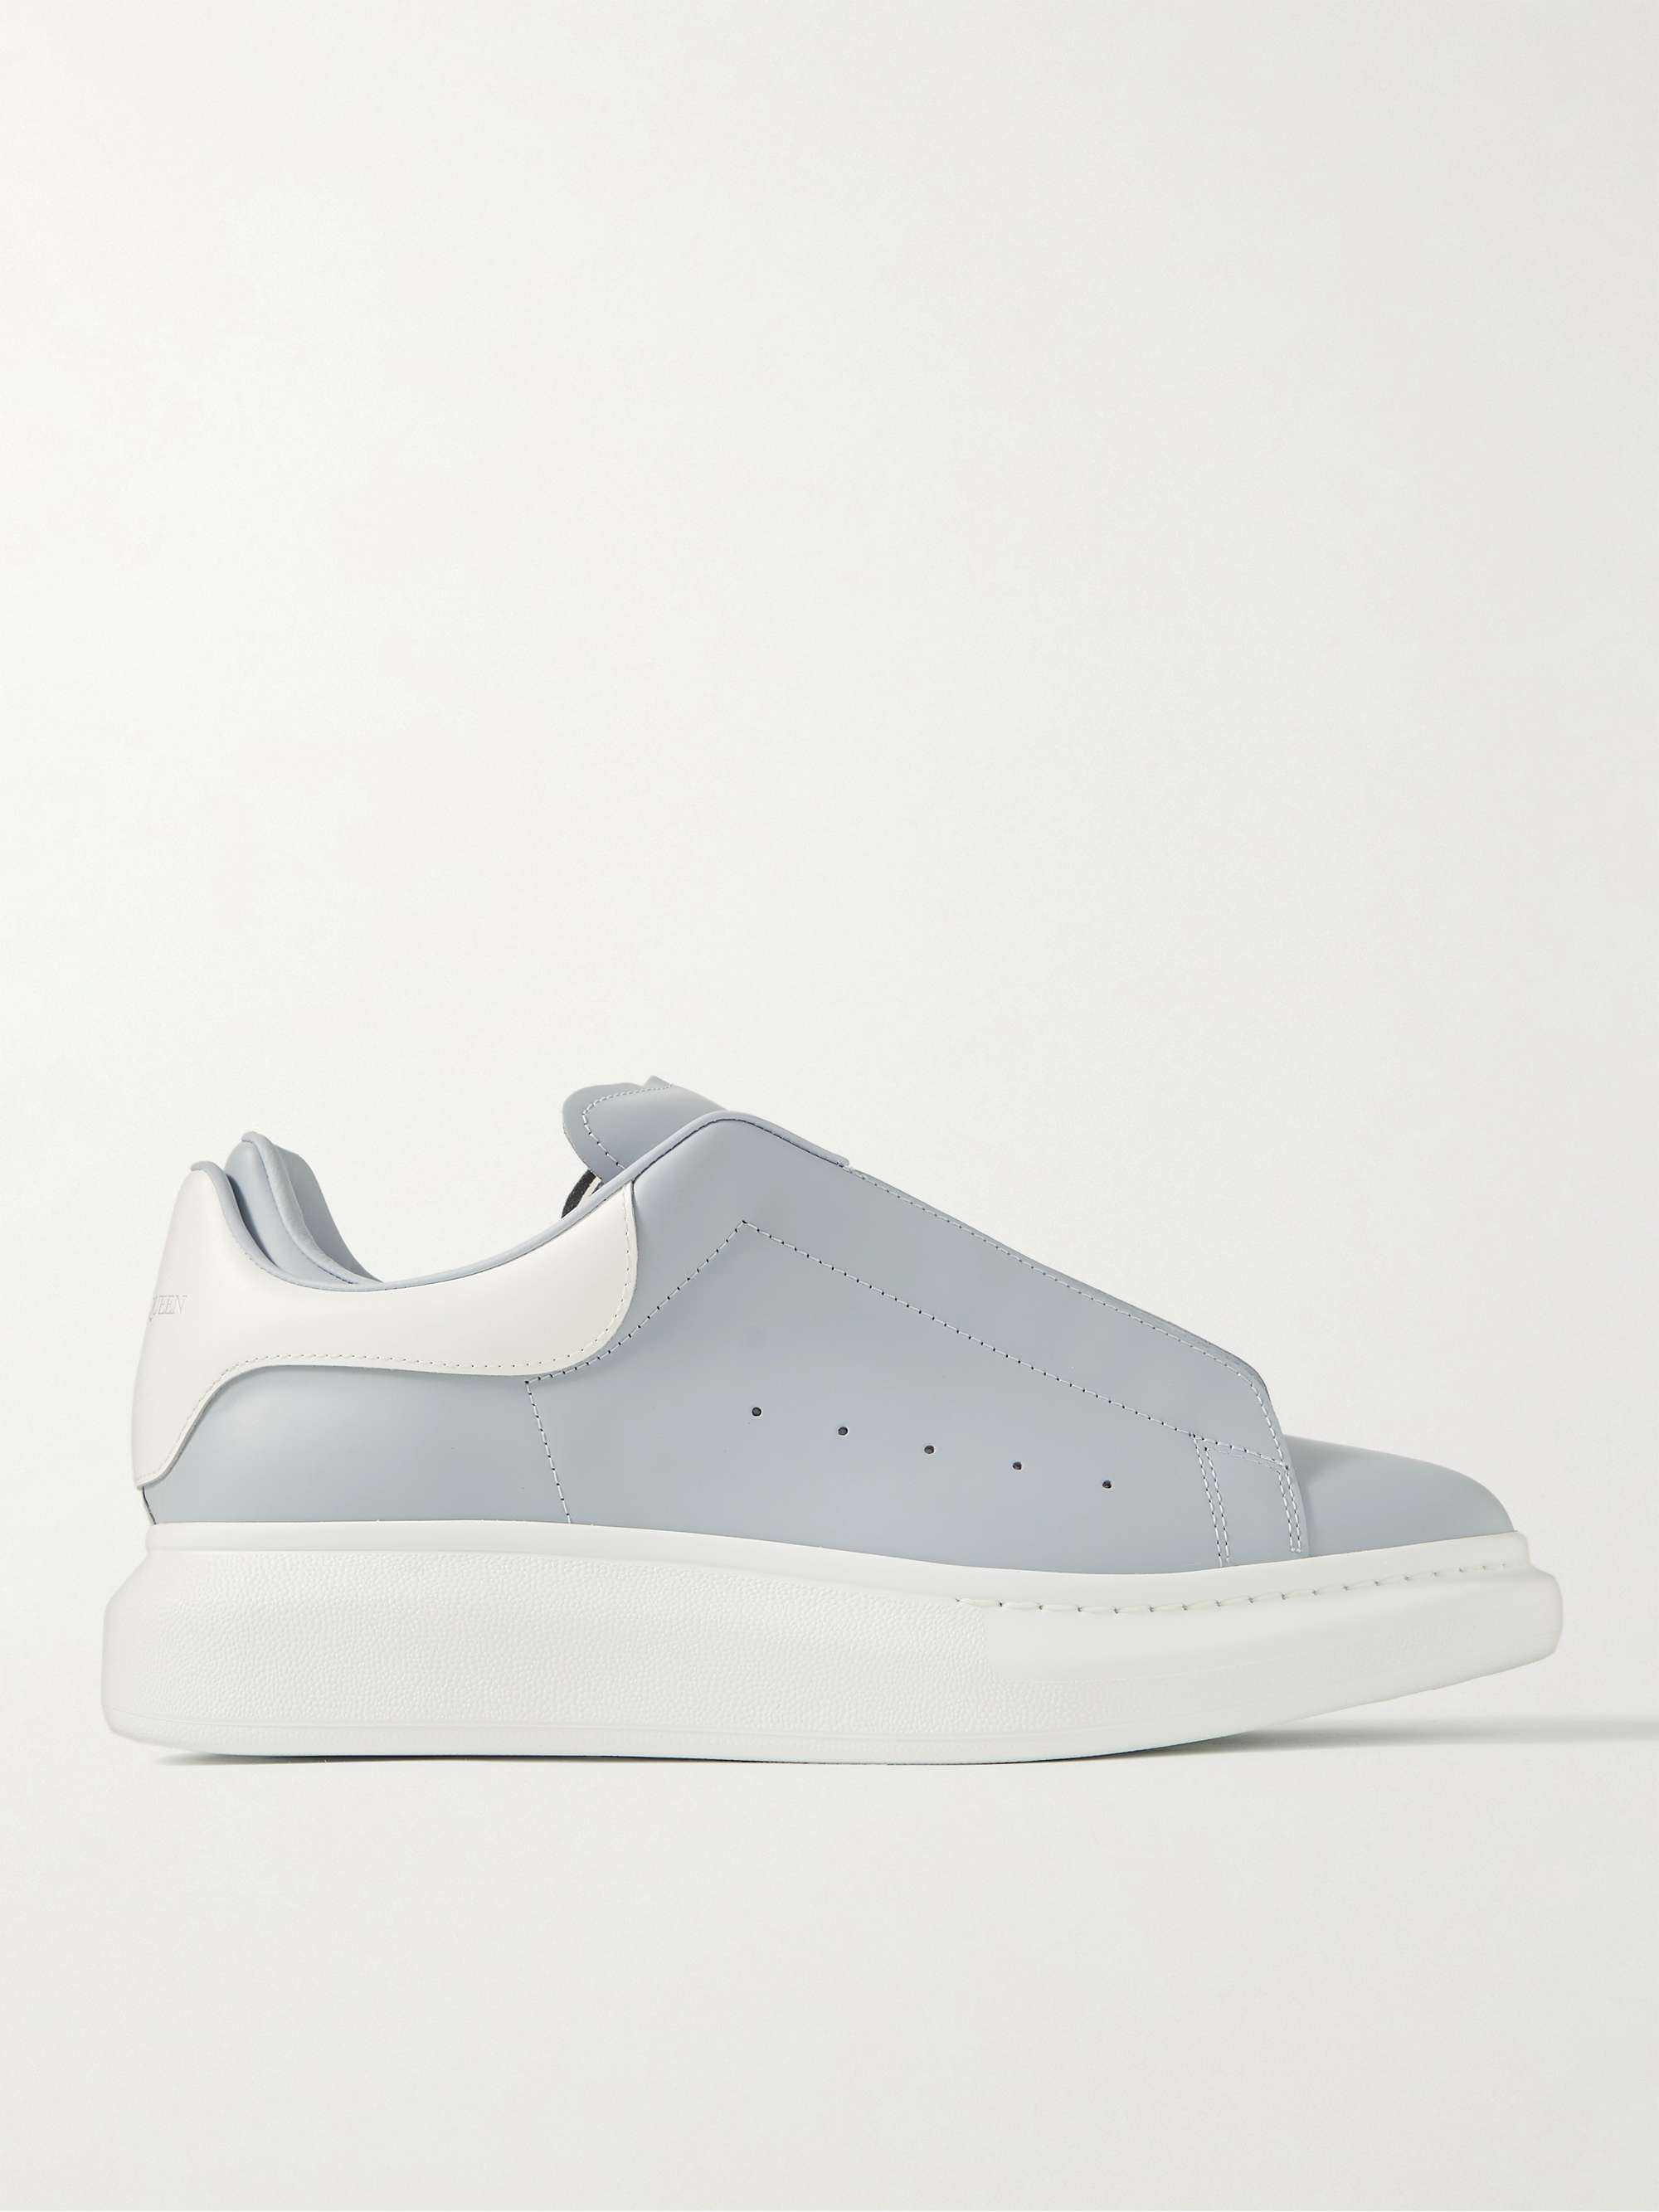 ALEXANDER MCQUEEN Exaggerated-Sole Two-Tone Leather Sneakers | MR PORTER